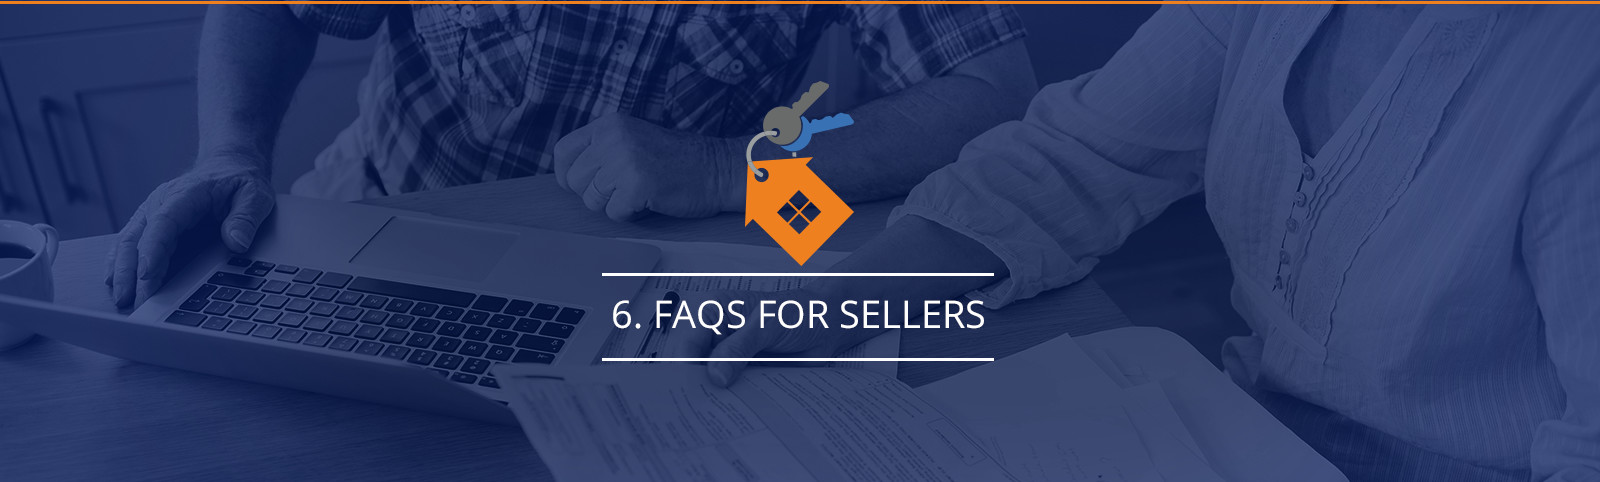 faqs for sellers